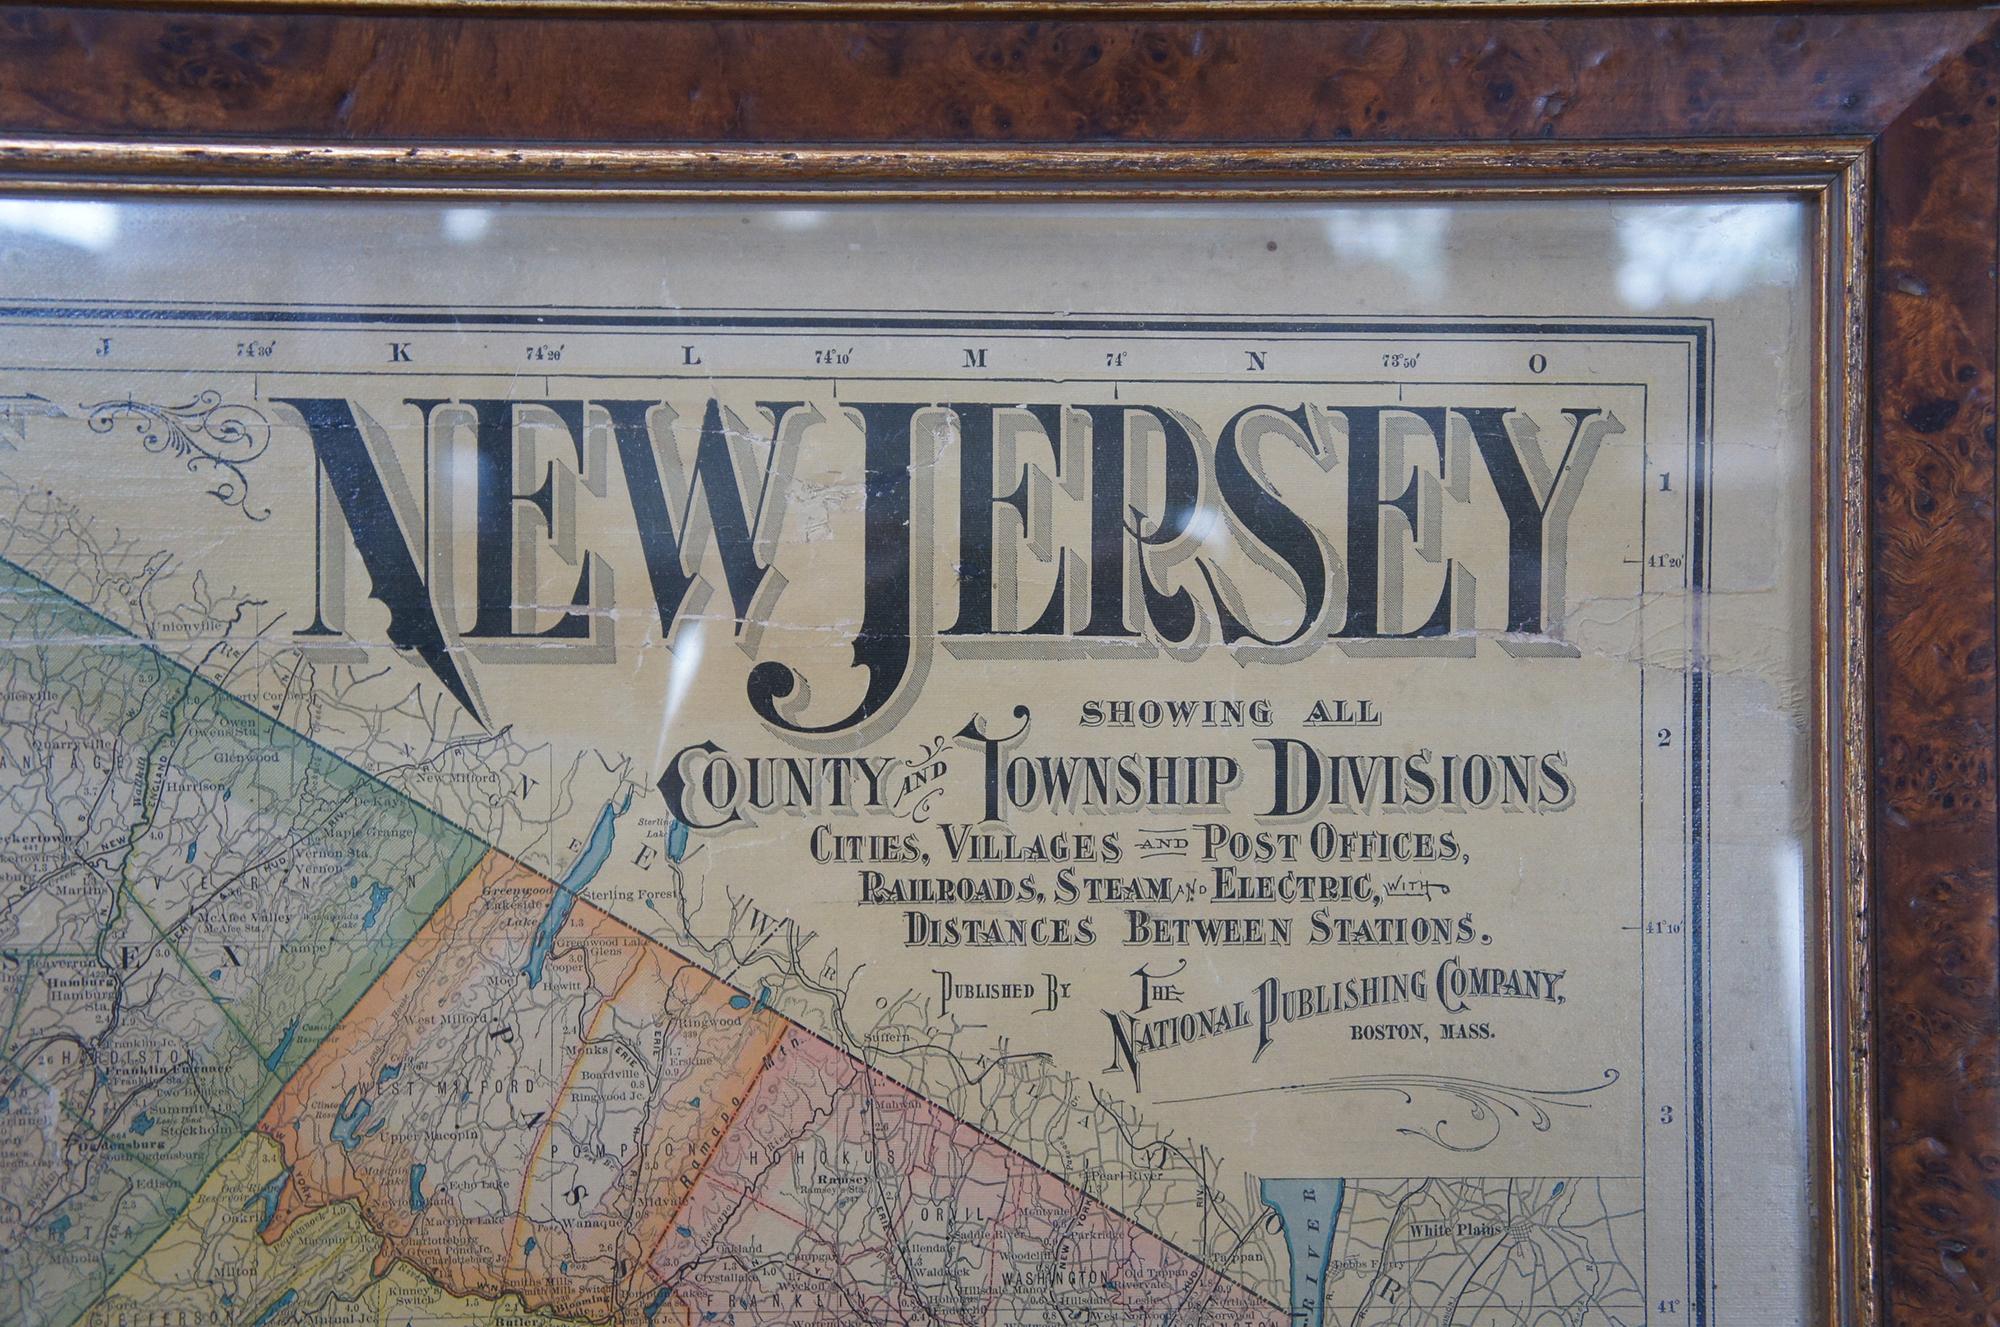 Paper 1903 Antique National Publishing Road Map of New Jersey Geological Survey For Sale